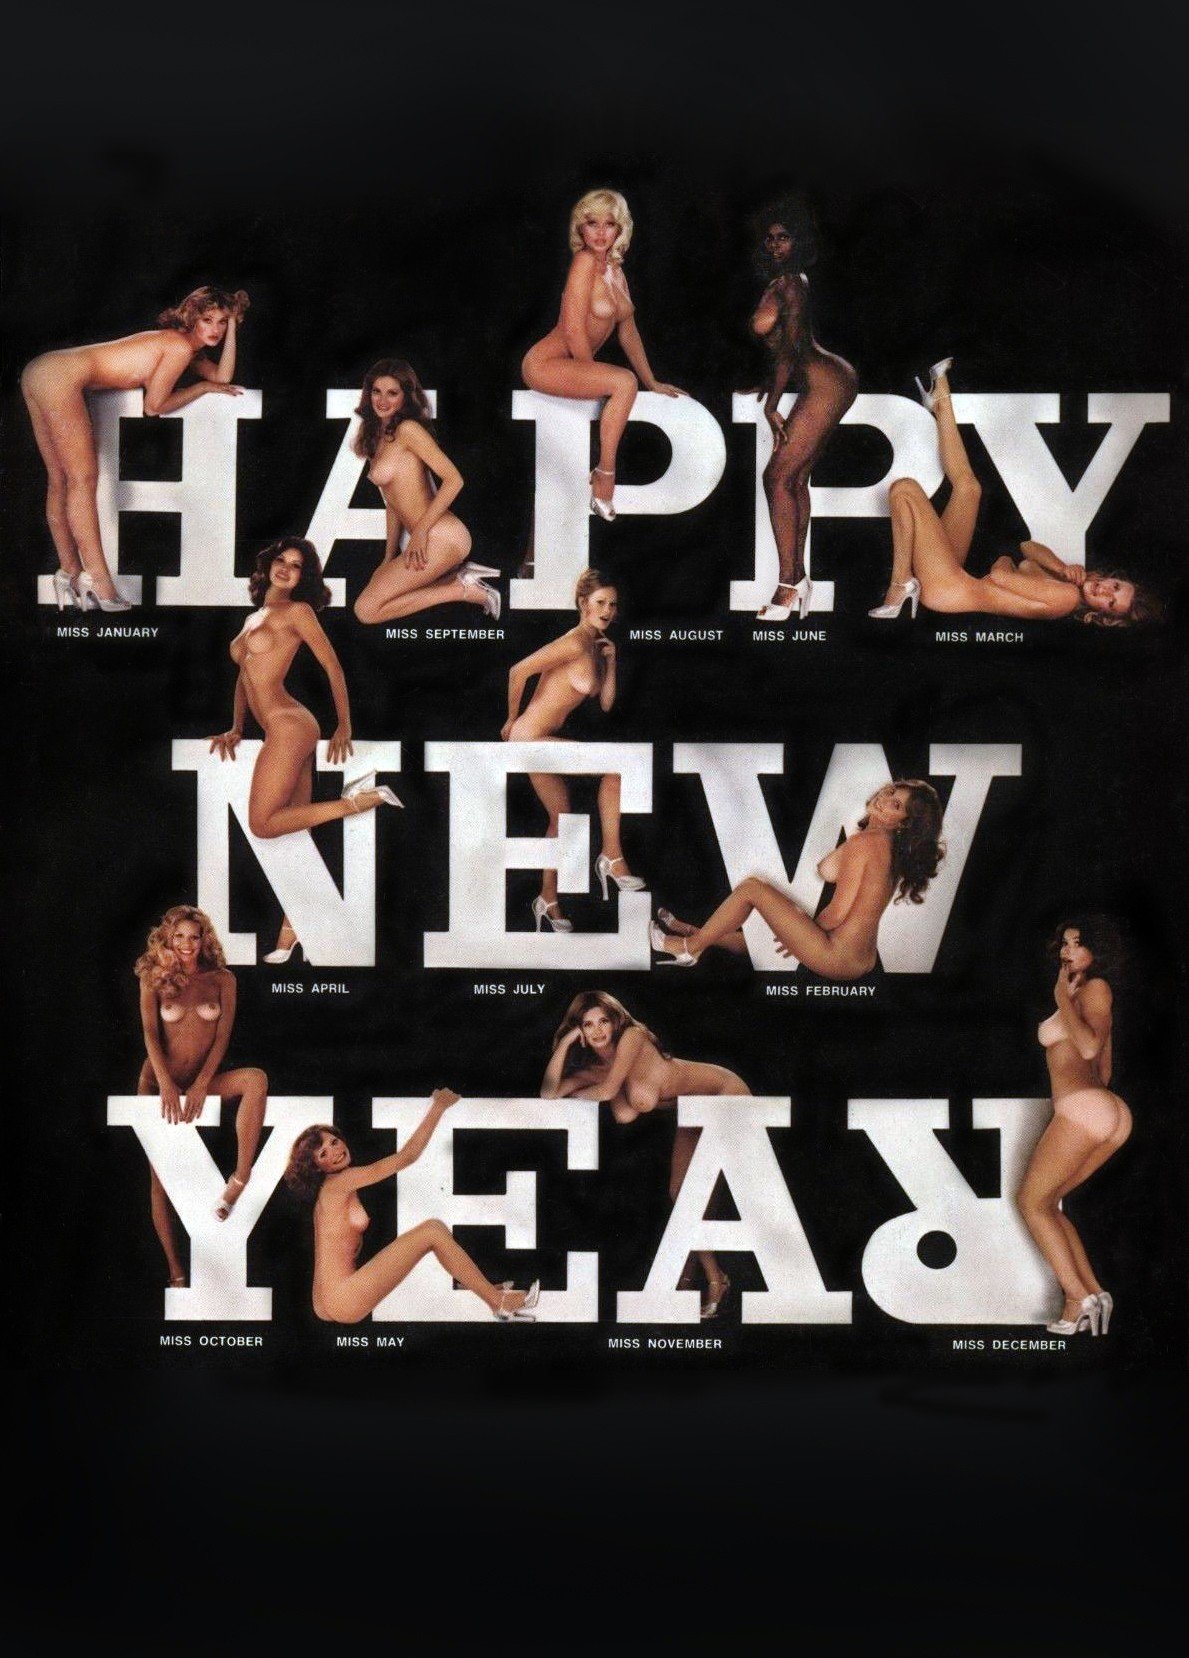 Photo by retrofucking with the username @retrofucking,  December 26, 2018 at 3:35 PM. The post is about the topic Vintage Porn and the text says 'Happy New Year! From the playboy playmates of 1976
http://www.retro-fucking.com #70s #1970s #vintage #playboy #happynewyear #newyearseve #tanlines #pinup #playmates #vintagemagazine #adultmagazine #vintageporn #lynndakimball #mesinamiller #lillianmuller..'